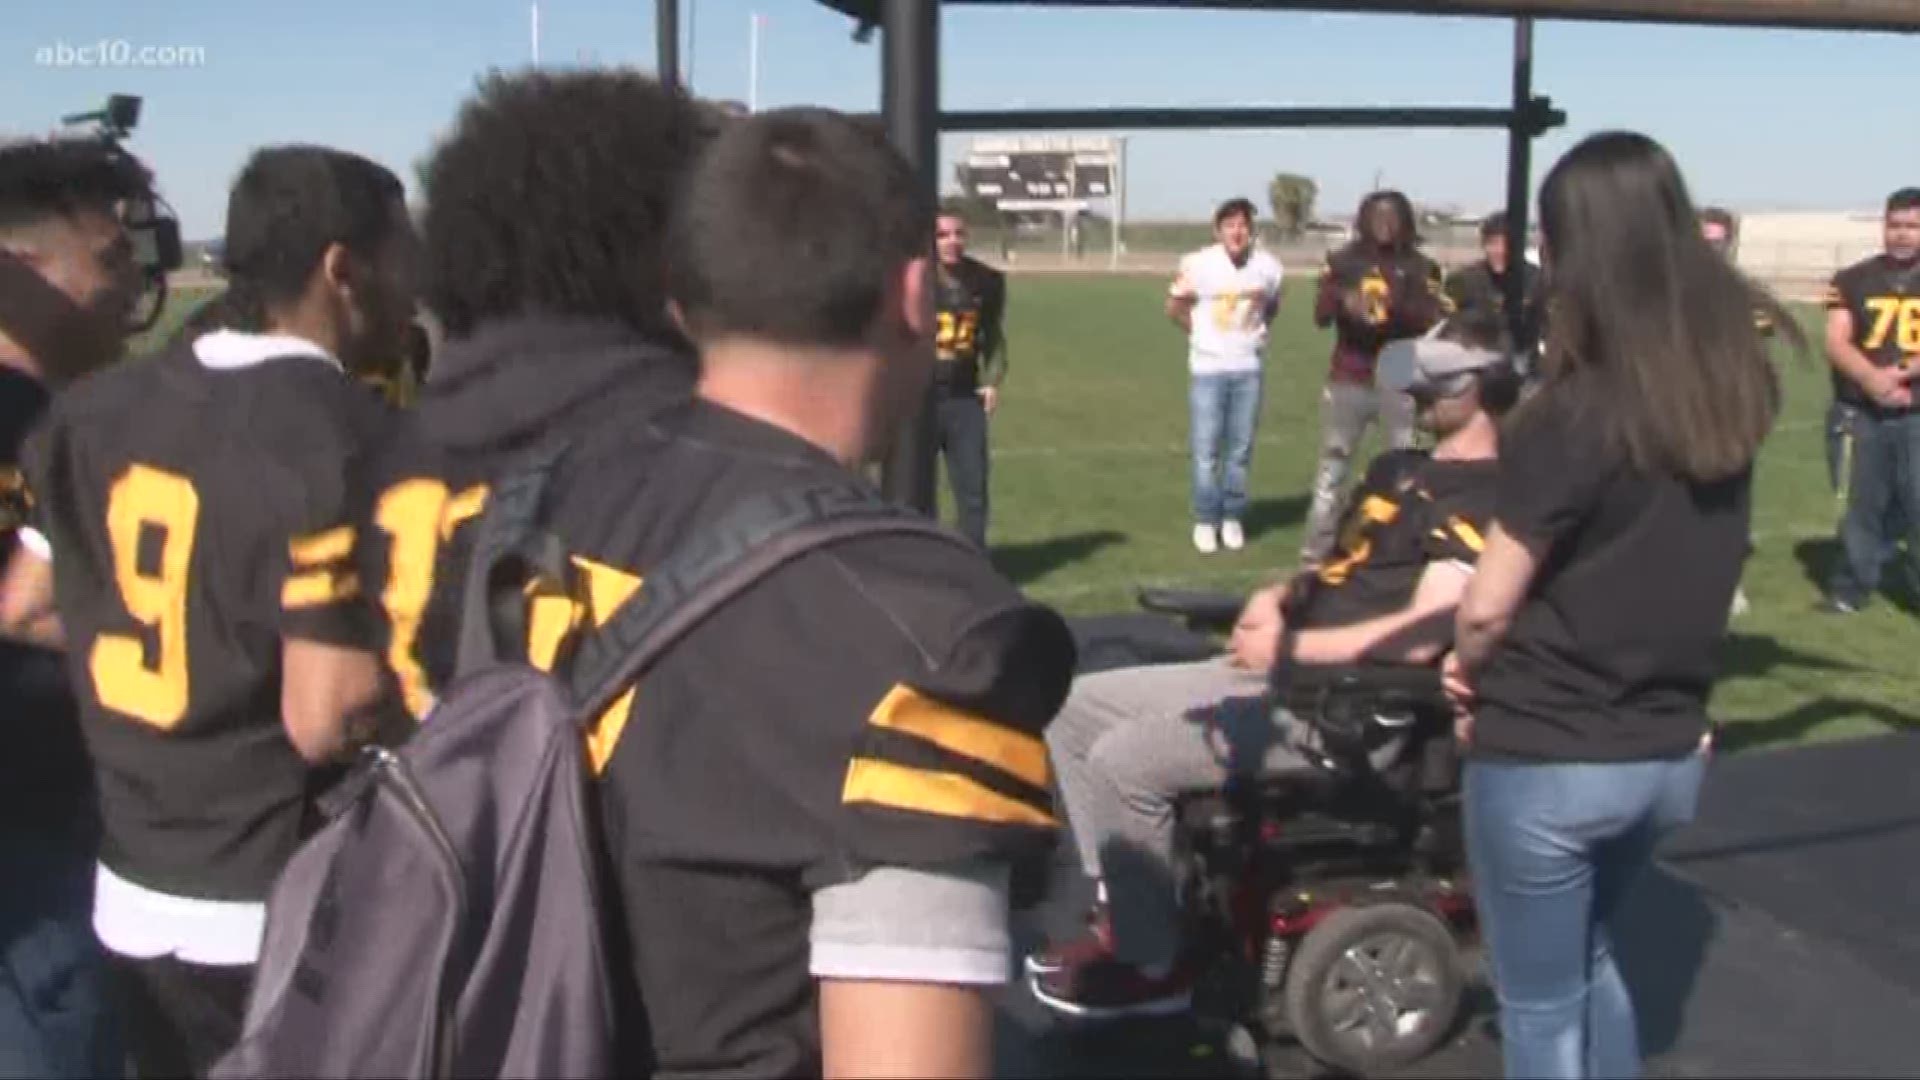 It was a Make-A-Wish dream come true like none other. On Friday at the Lathrop High School football stadium, in his wheelchair flanked by teammates, 17-year-old Keannu Linnell returned to the field. Keannu was diagnosed with an aggressive form of brain cancer during his sophomore year in school. His only wish was to play the game he loves once more.